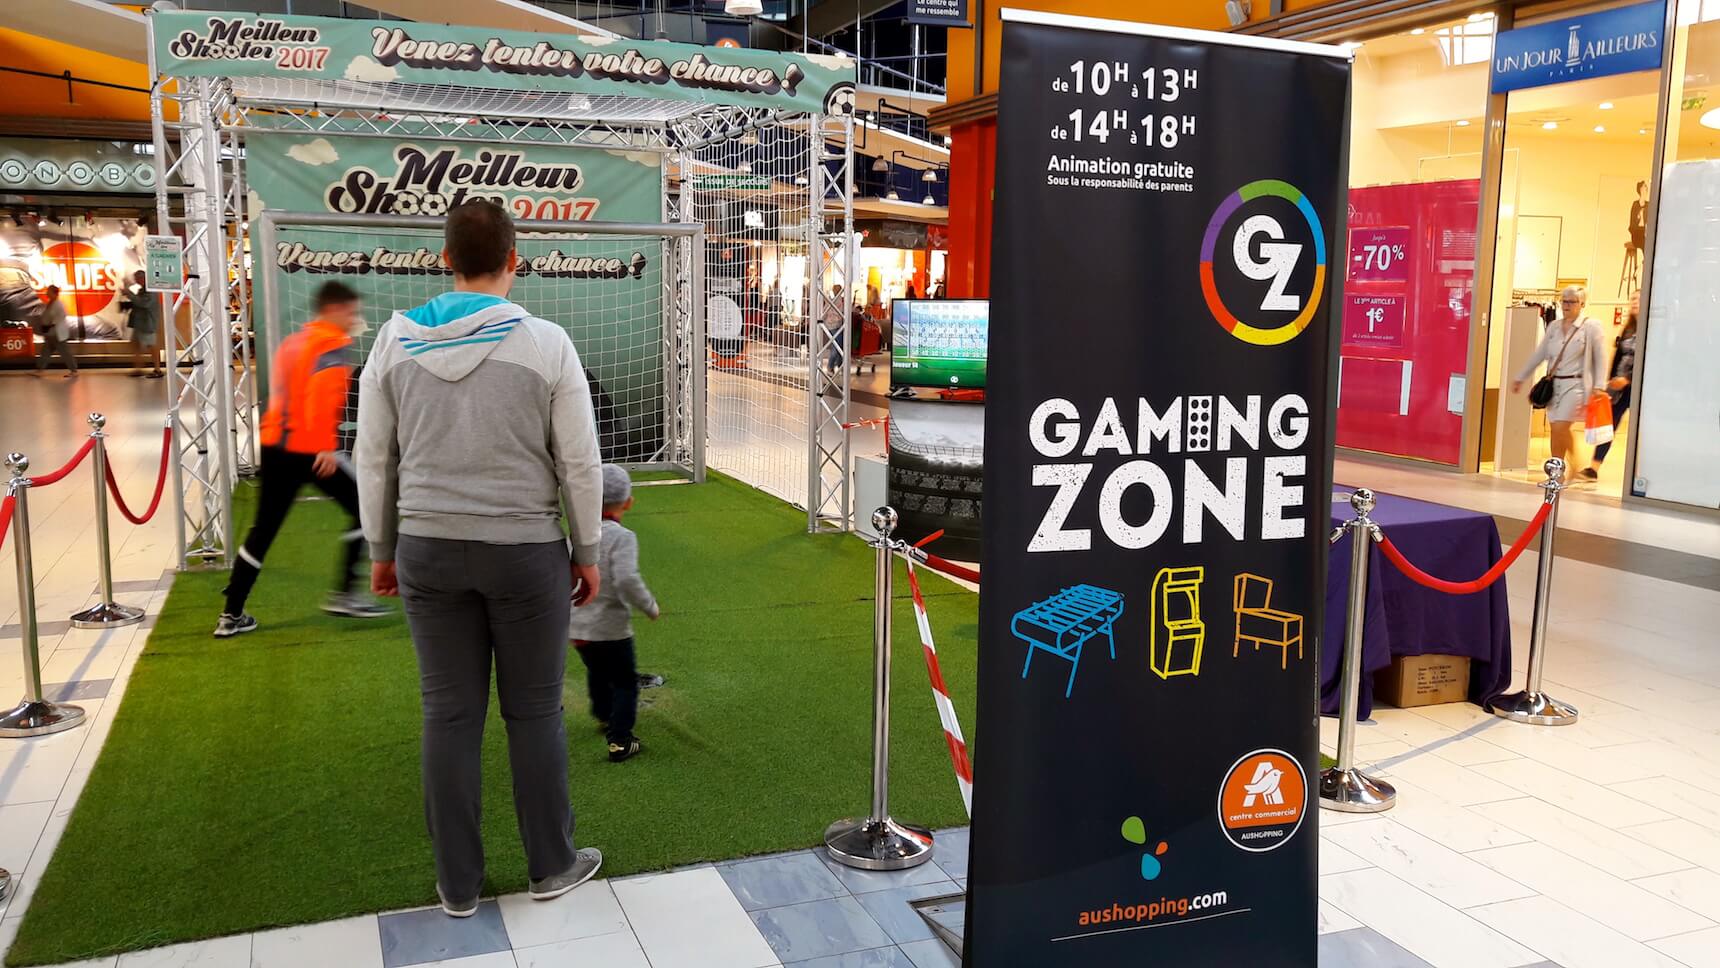 Attention, gaming zone !